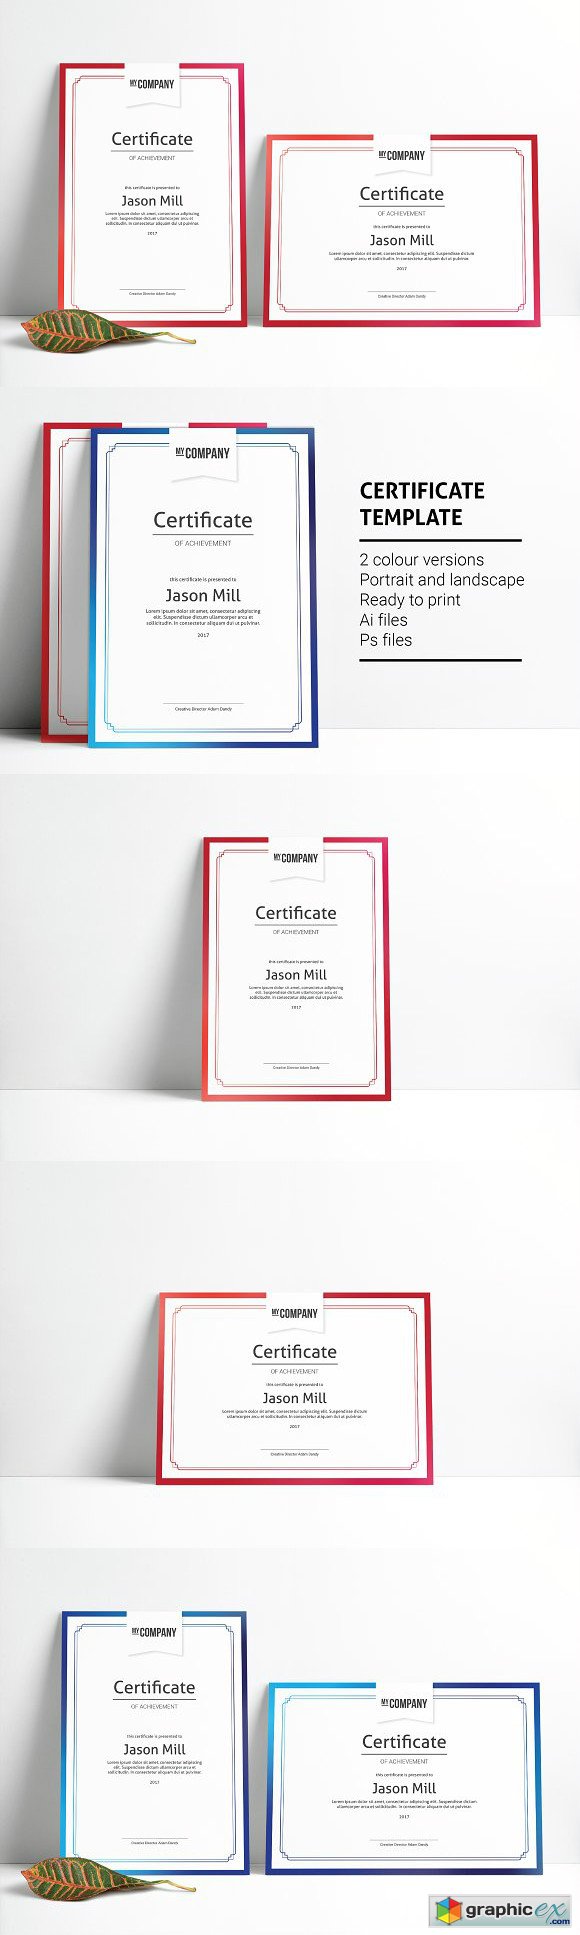 free certificate templates for photoshop